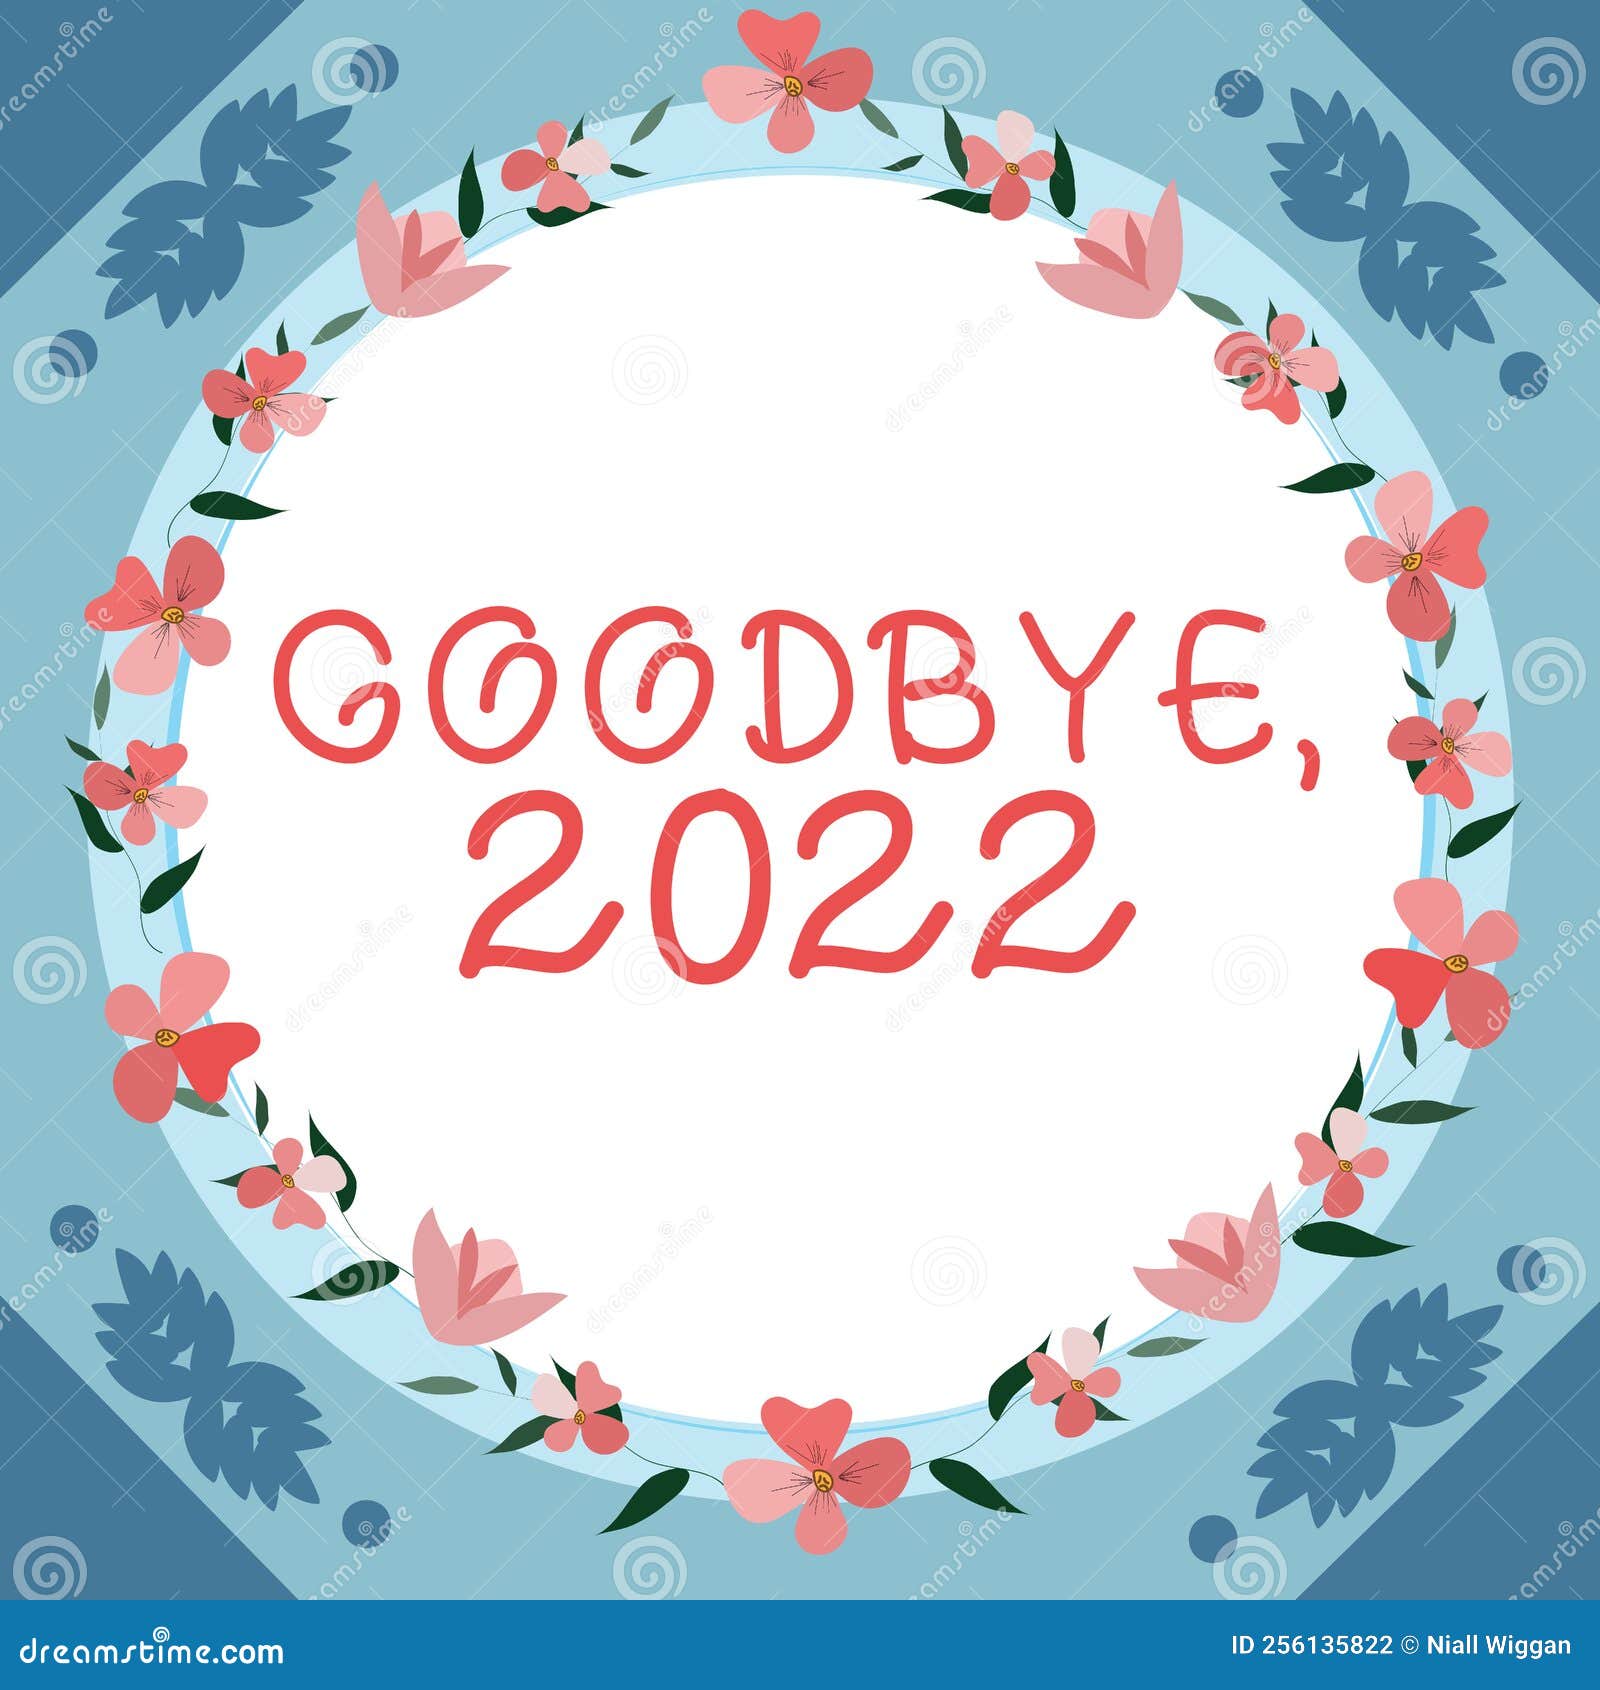 writing displaying text goodbye 2022. word for new year eve milestone last month celebration transition